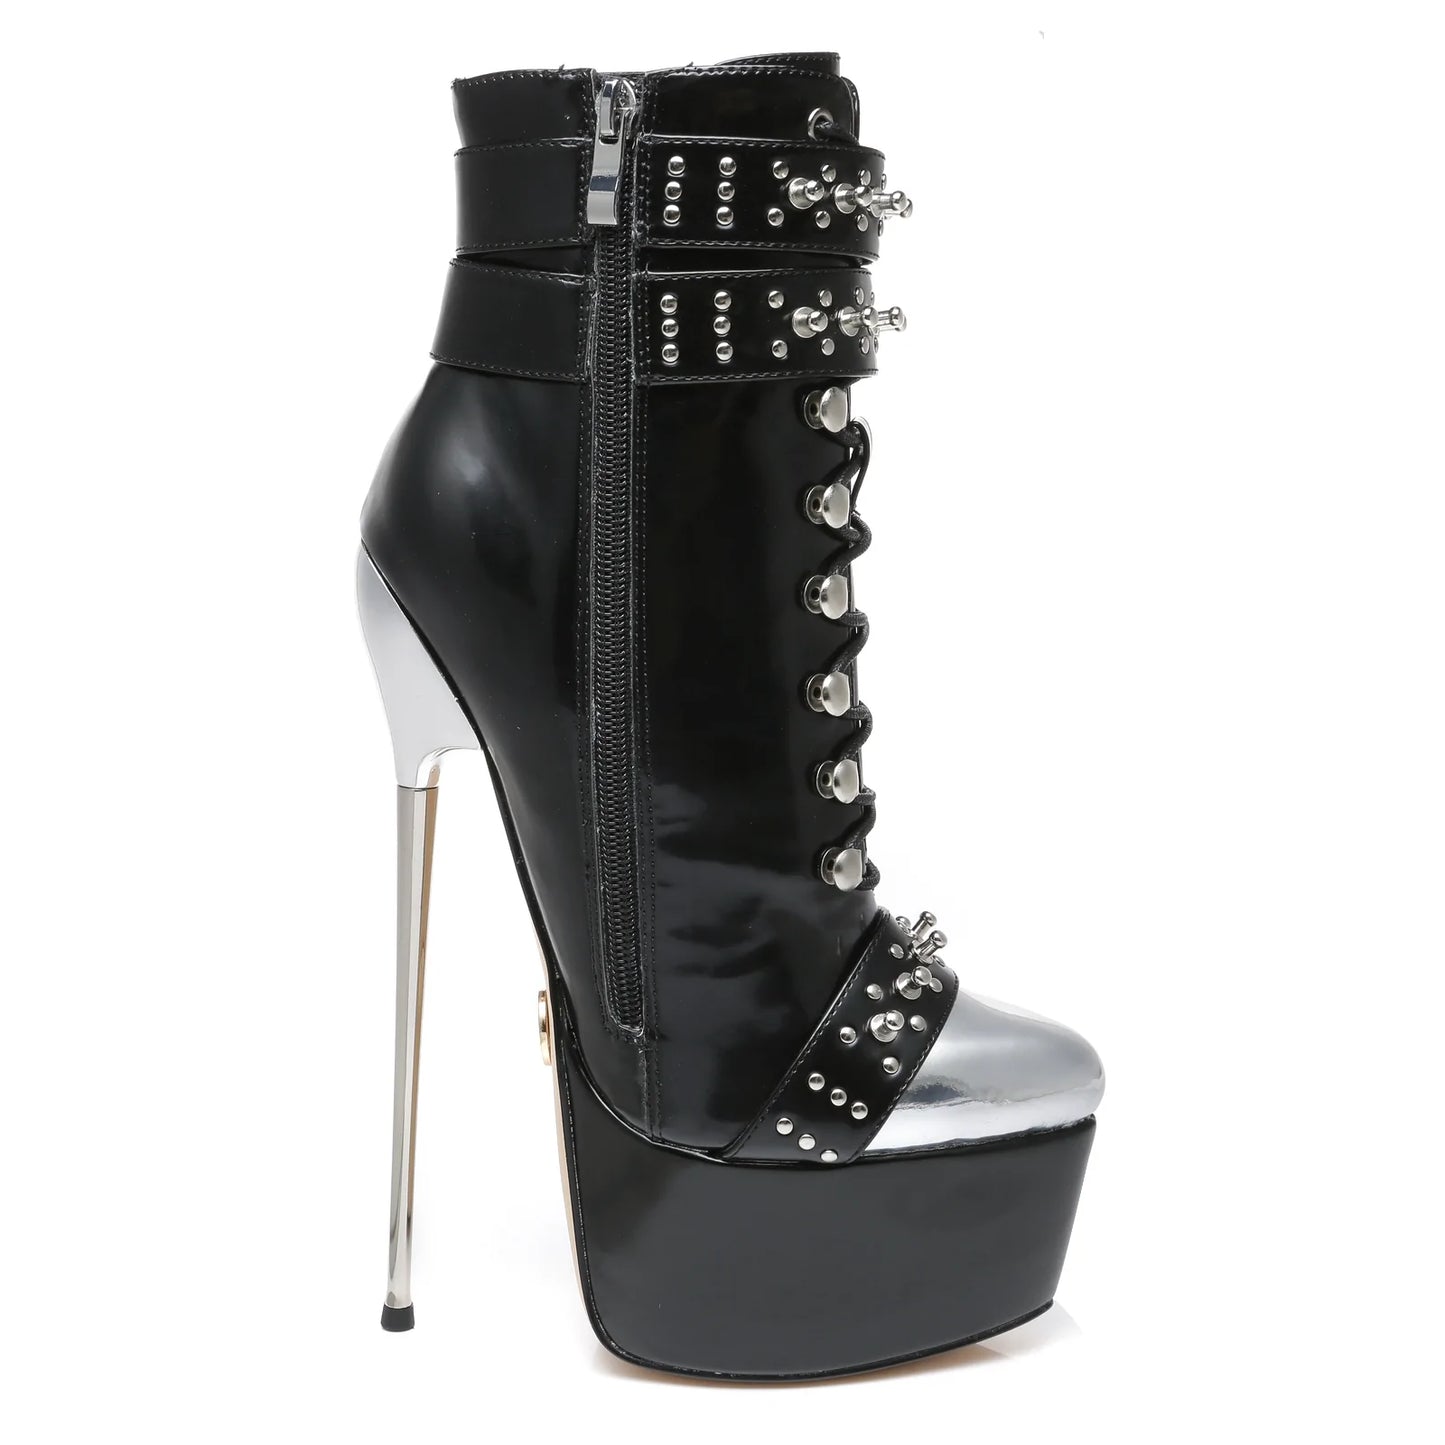 Platform ankle boots with rivets